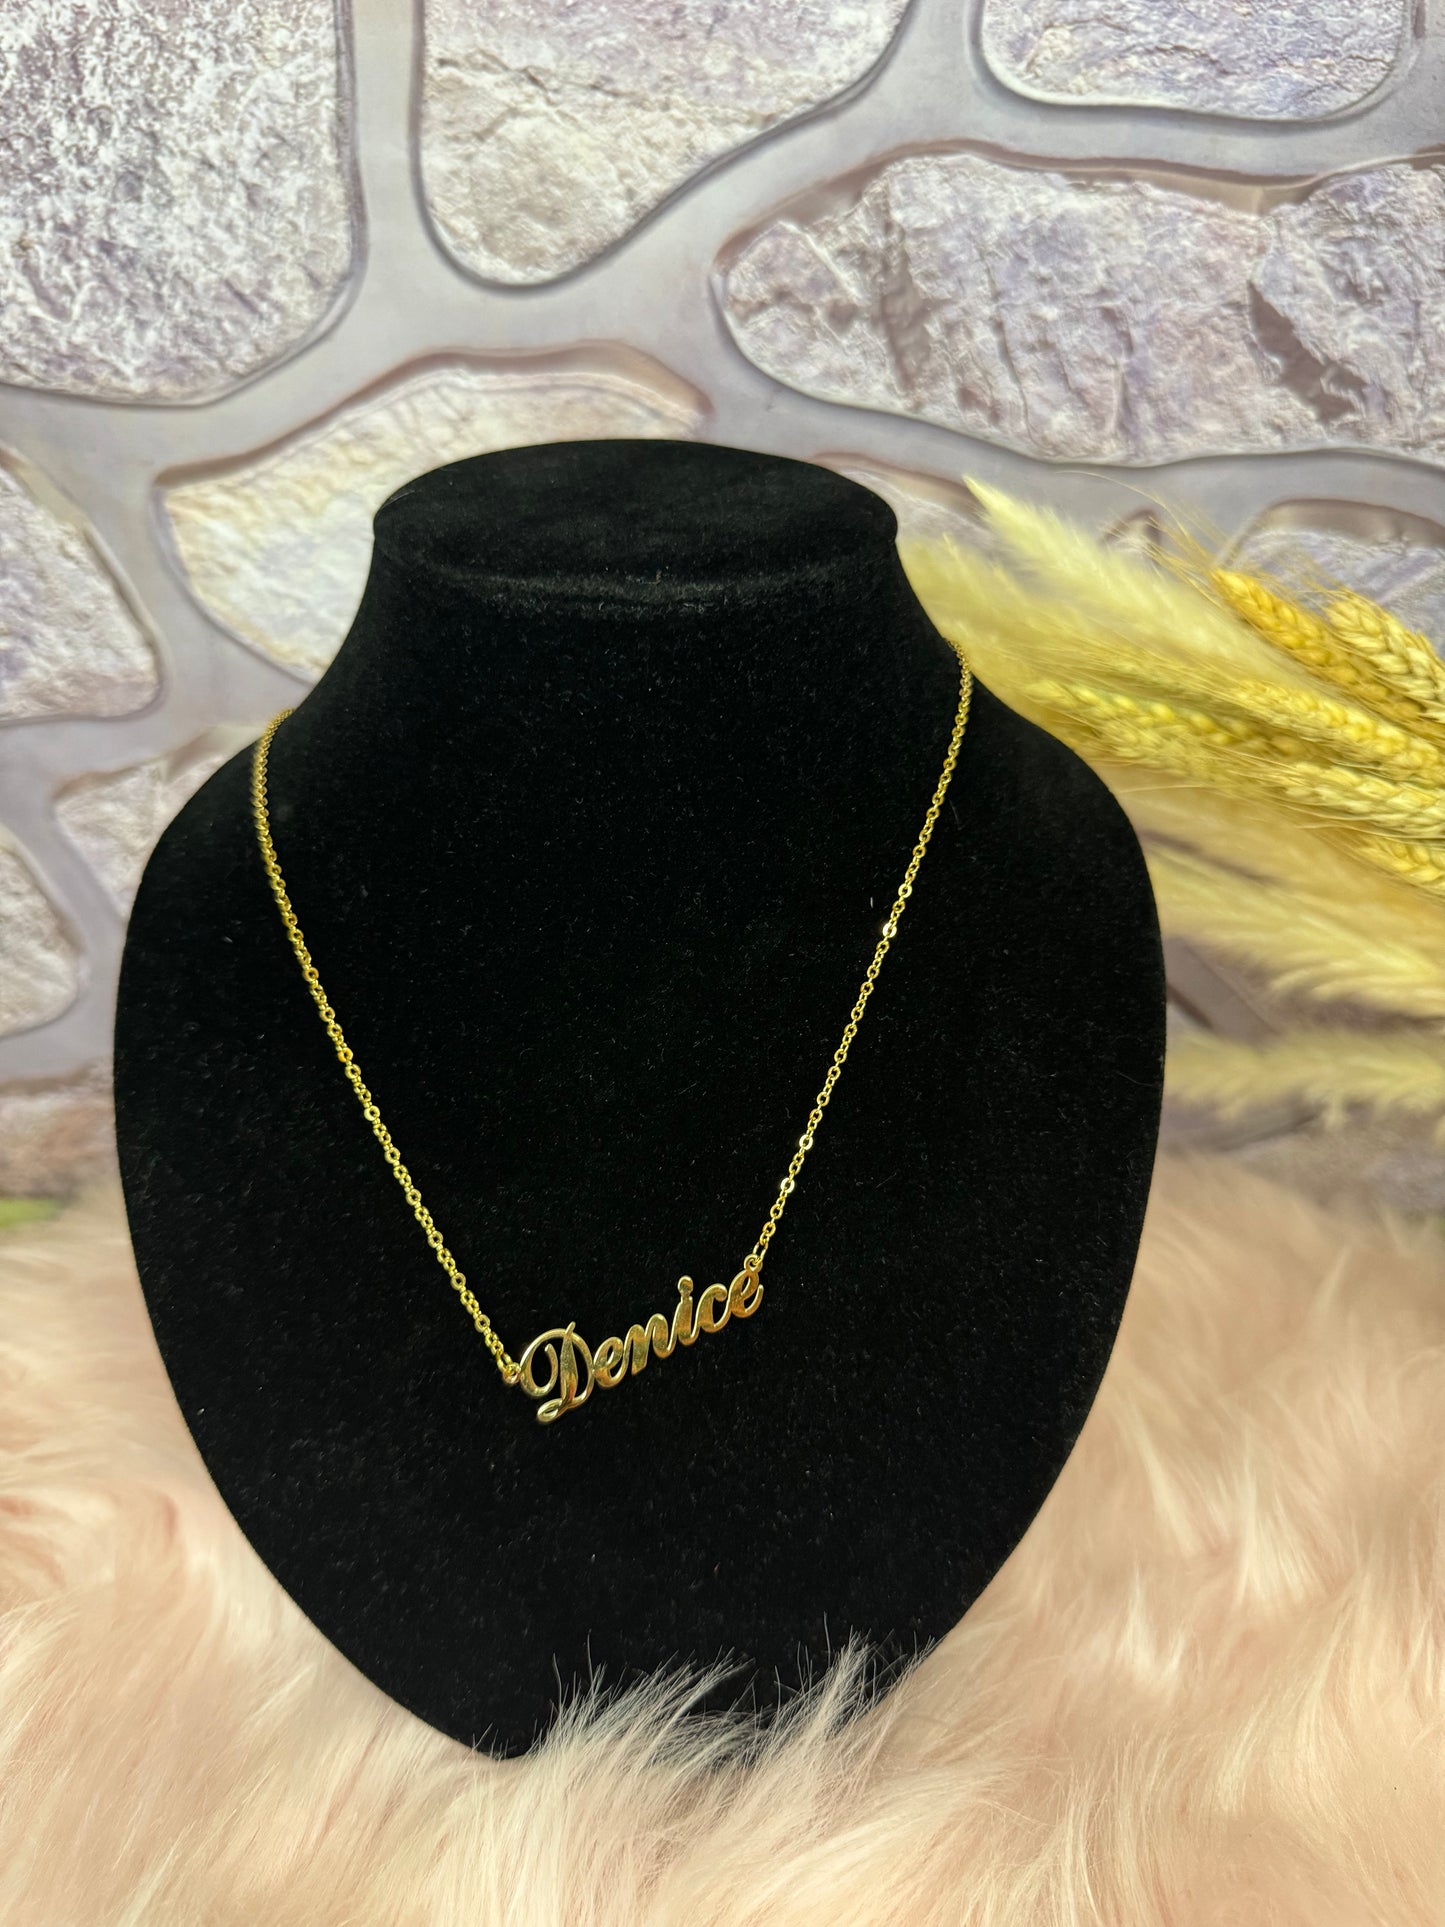 Denice instock name necklace - stainless steel gold plated